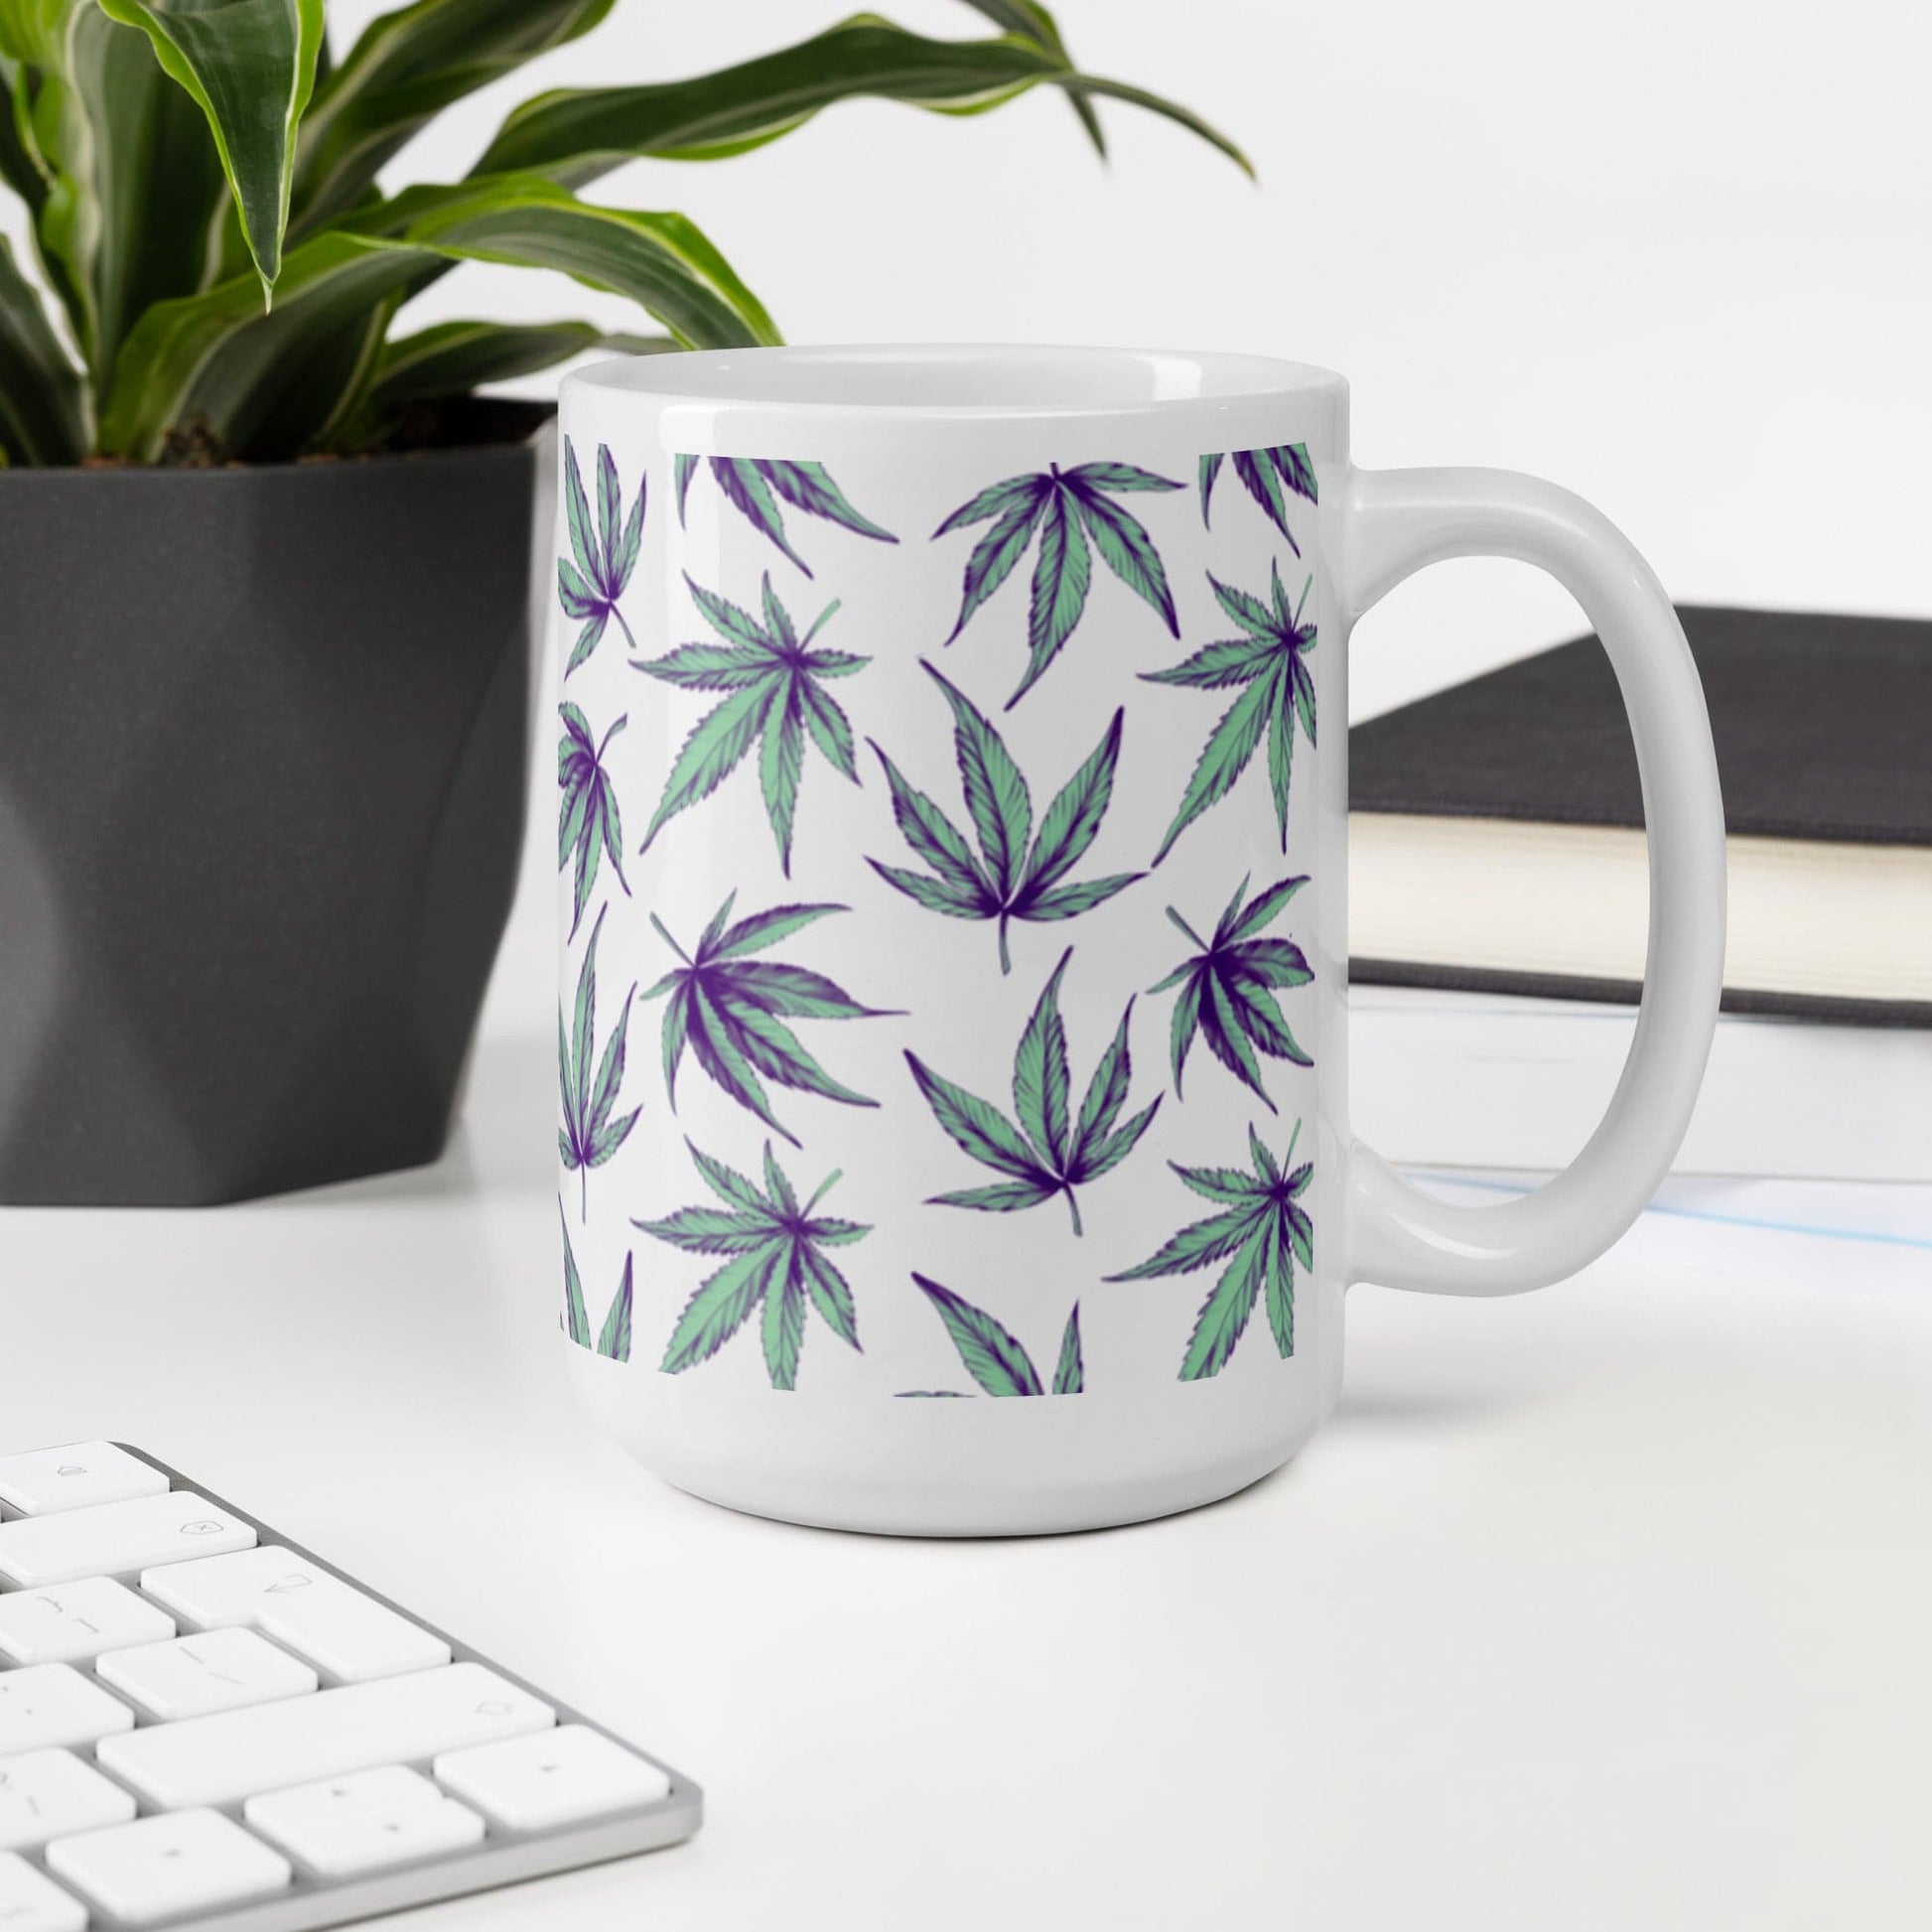 A larger Minty Flower Cannabis Mug that fits up to 15 ounces, on a white desk with a black flower pot and keyboard next to it